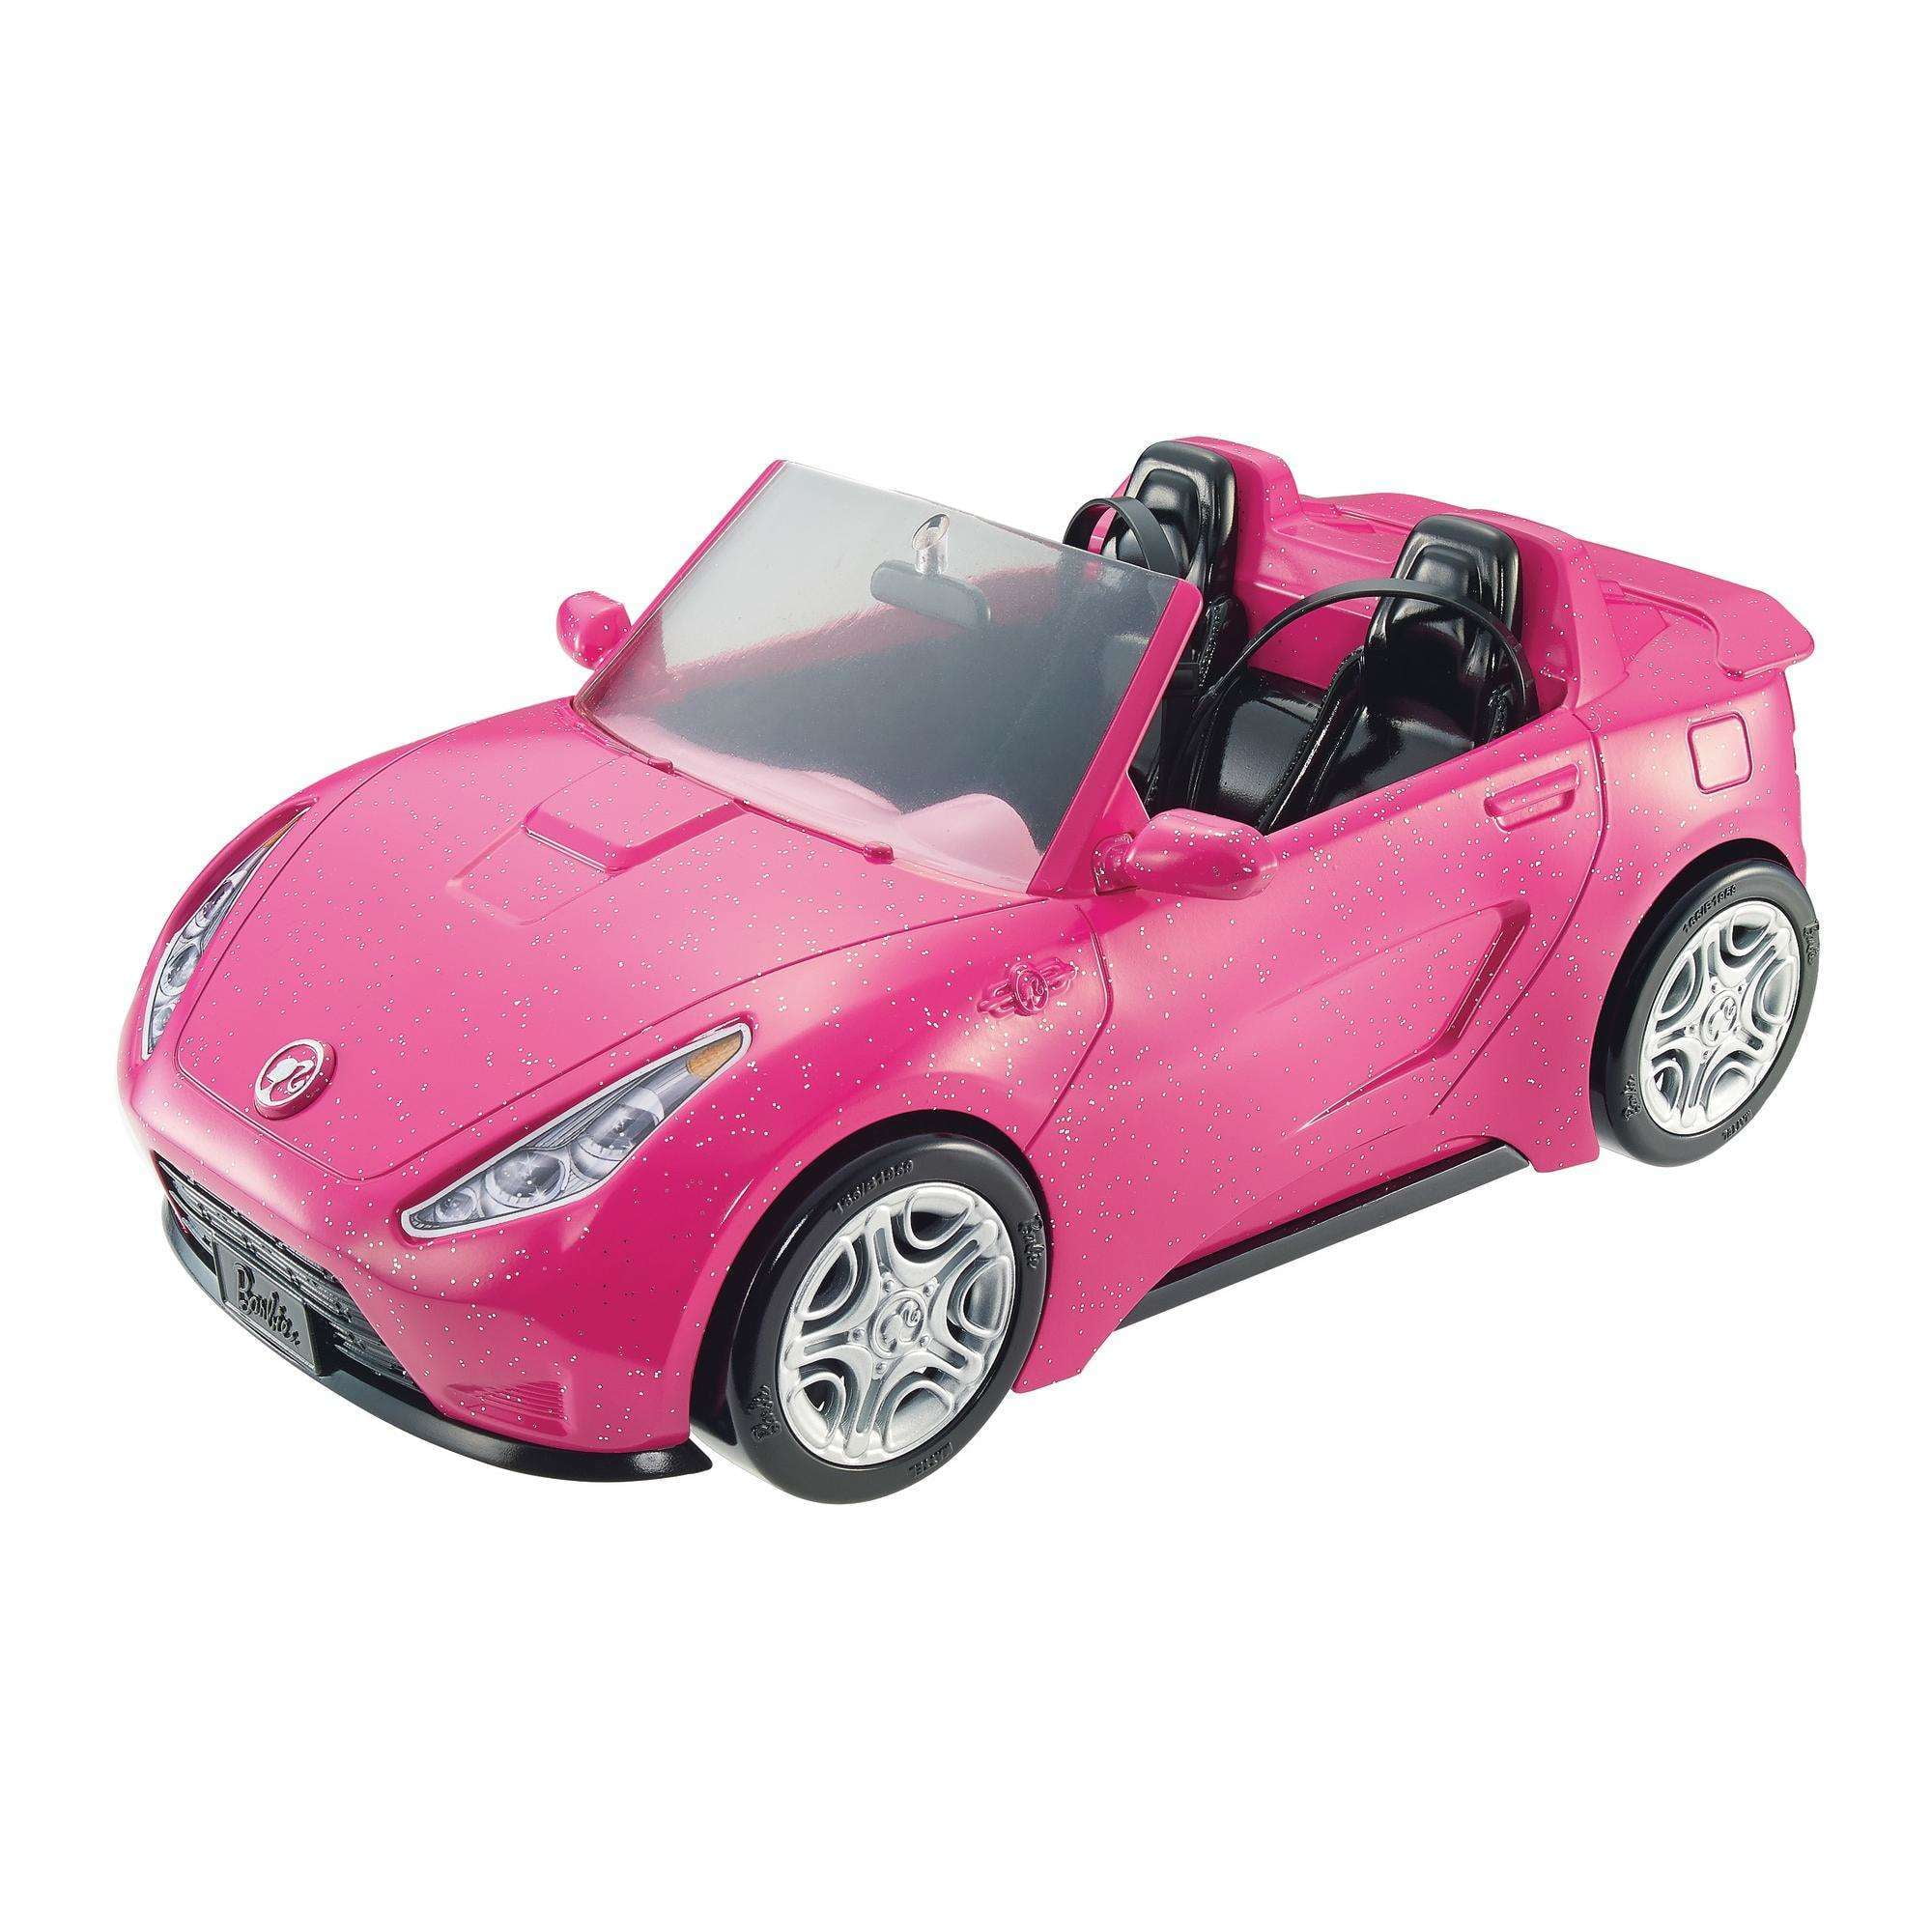 PLAYSKOOL Dollhouse PINK CONVERTIBLE CAR VEHICLE w/ BUILT IN CAR SEAT Excellent! 